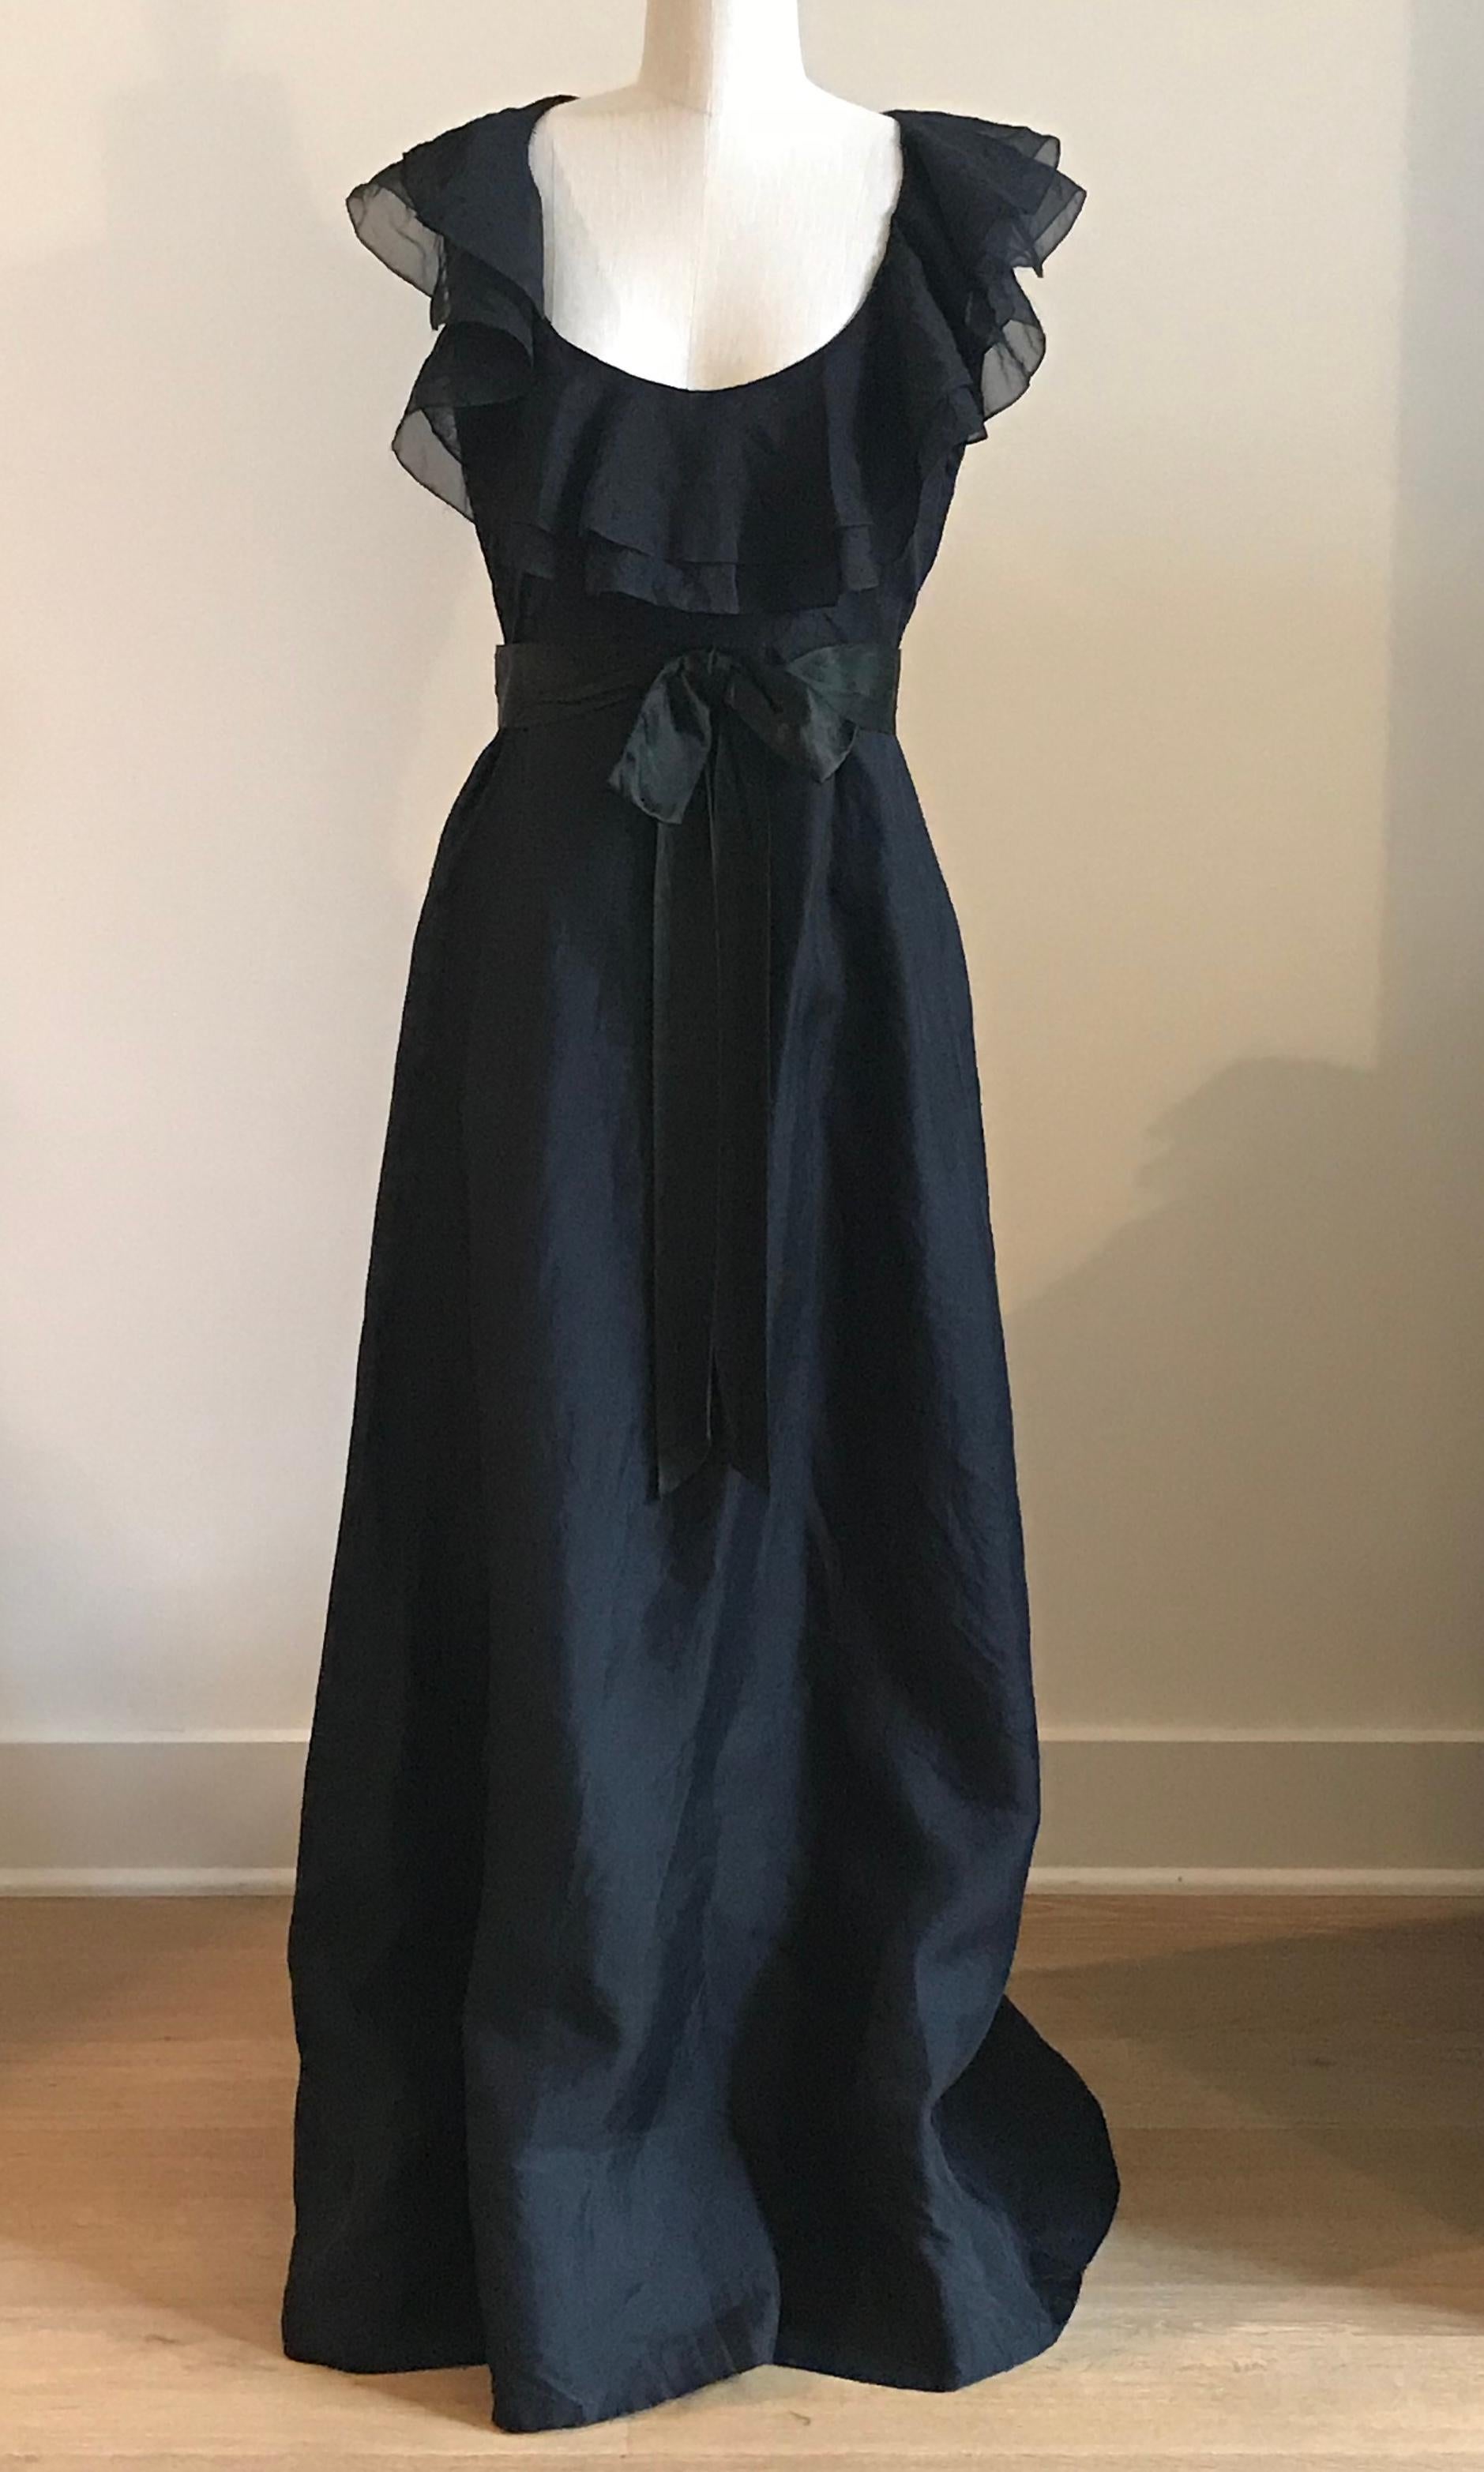 Vintage 1960s Sarmi black floor length dress with a low cut neck surrounded by a layered ruffle and a ribbon bow belt at waist. Back zip.

No content label, feels like a mid-weight semi-sheer organza.
Fully lined.

No size label, best fits S/M. See